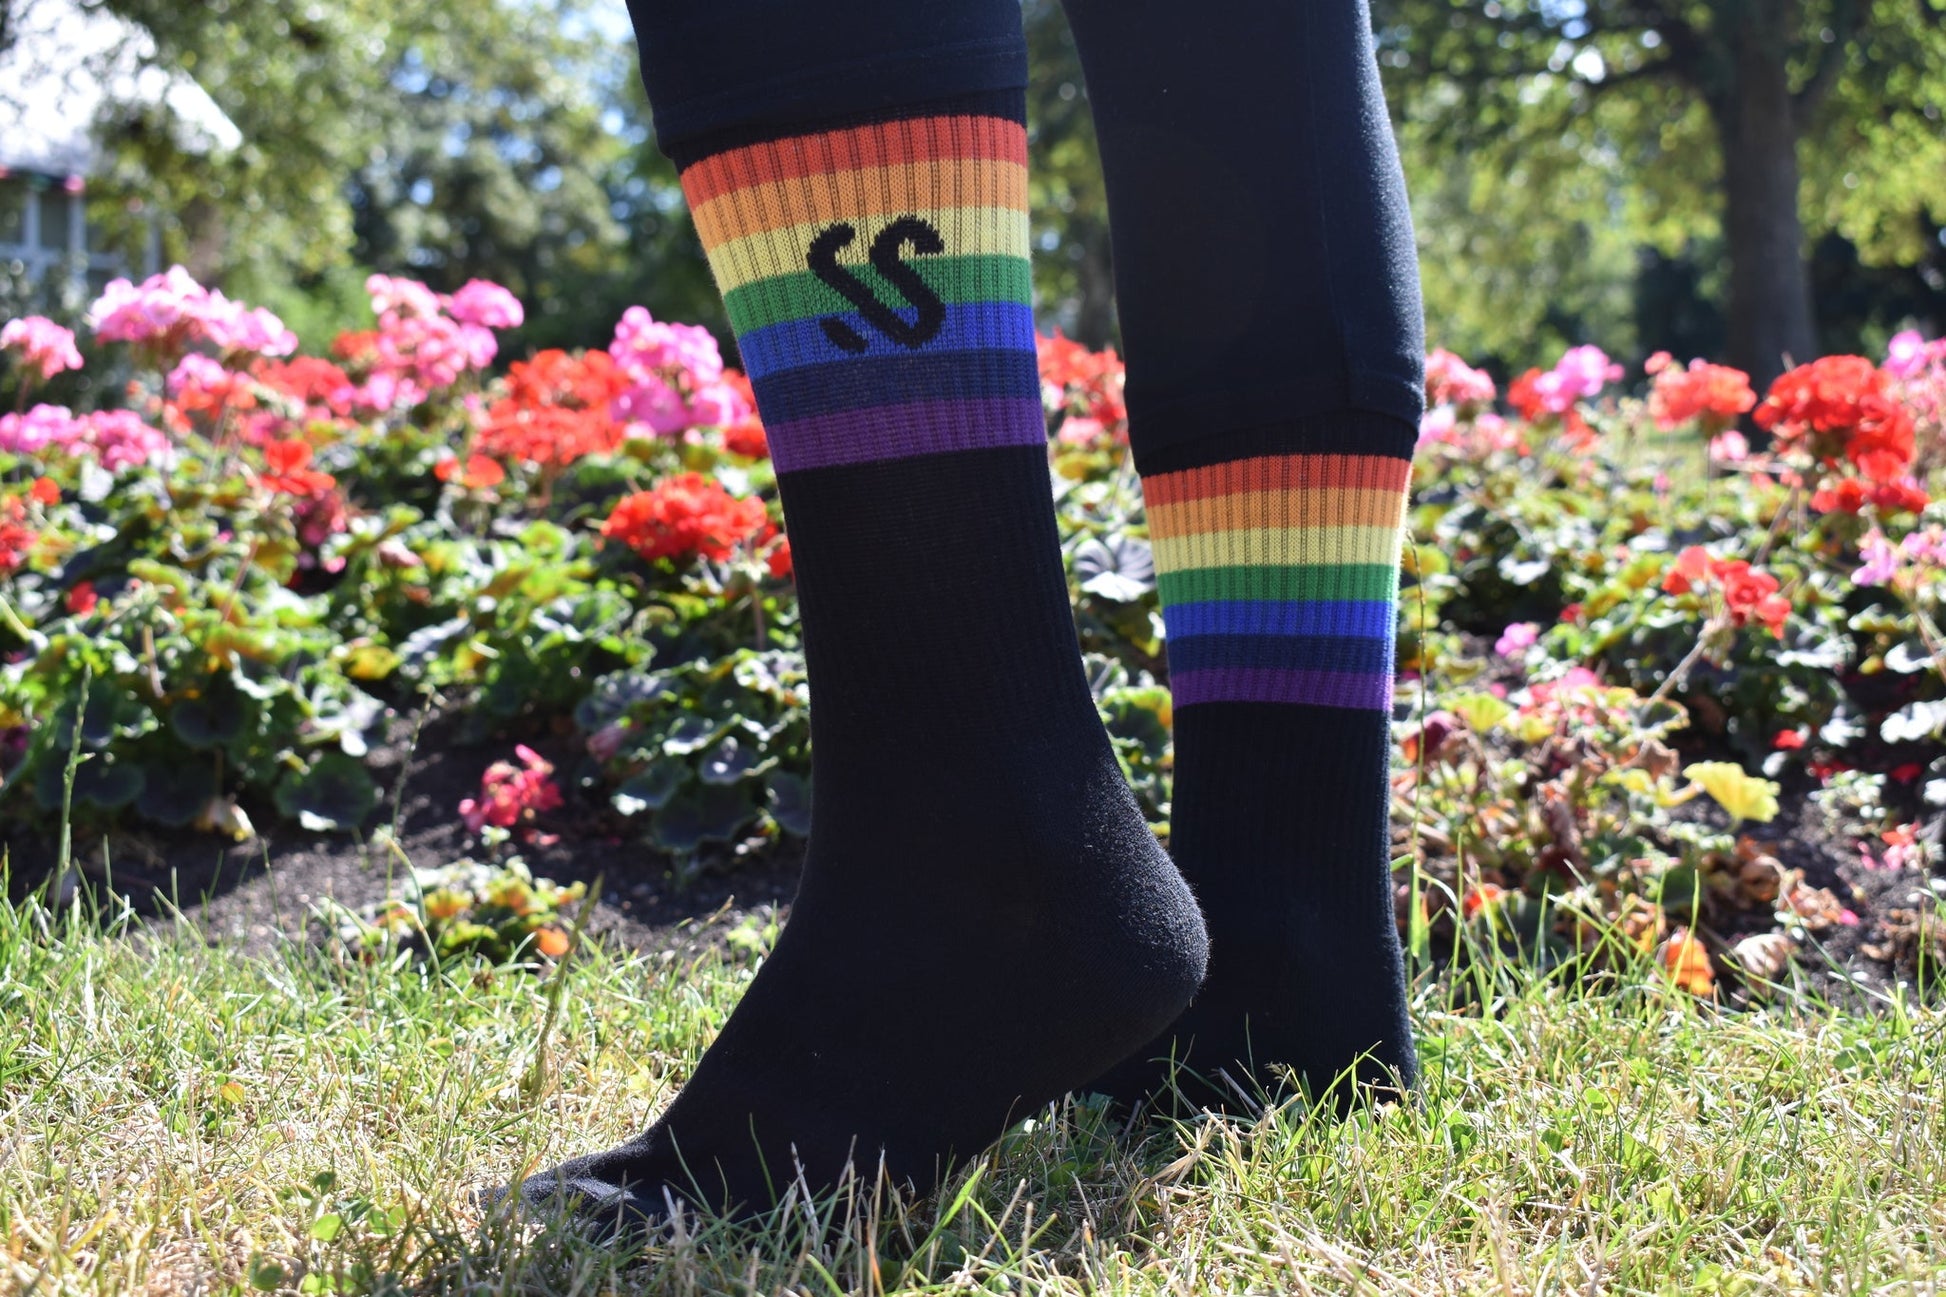 A pair of black crew length socks with a rainbow band being worn outside on the grass